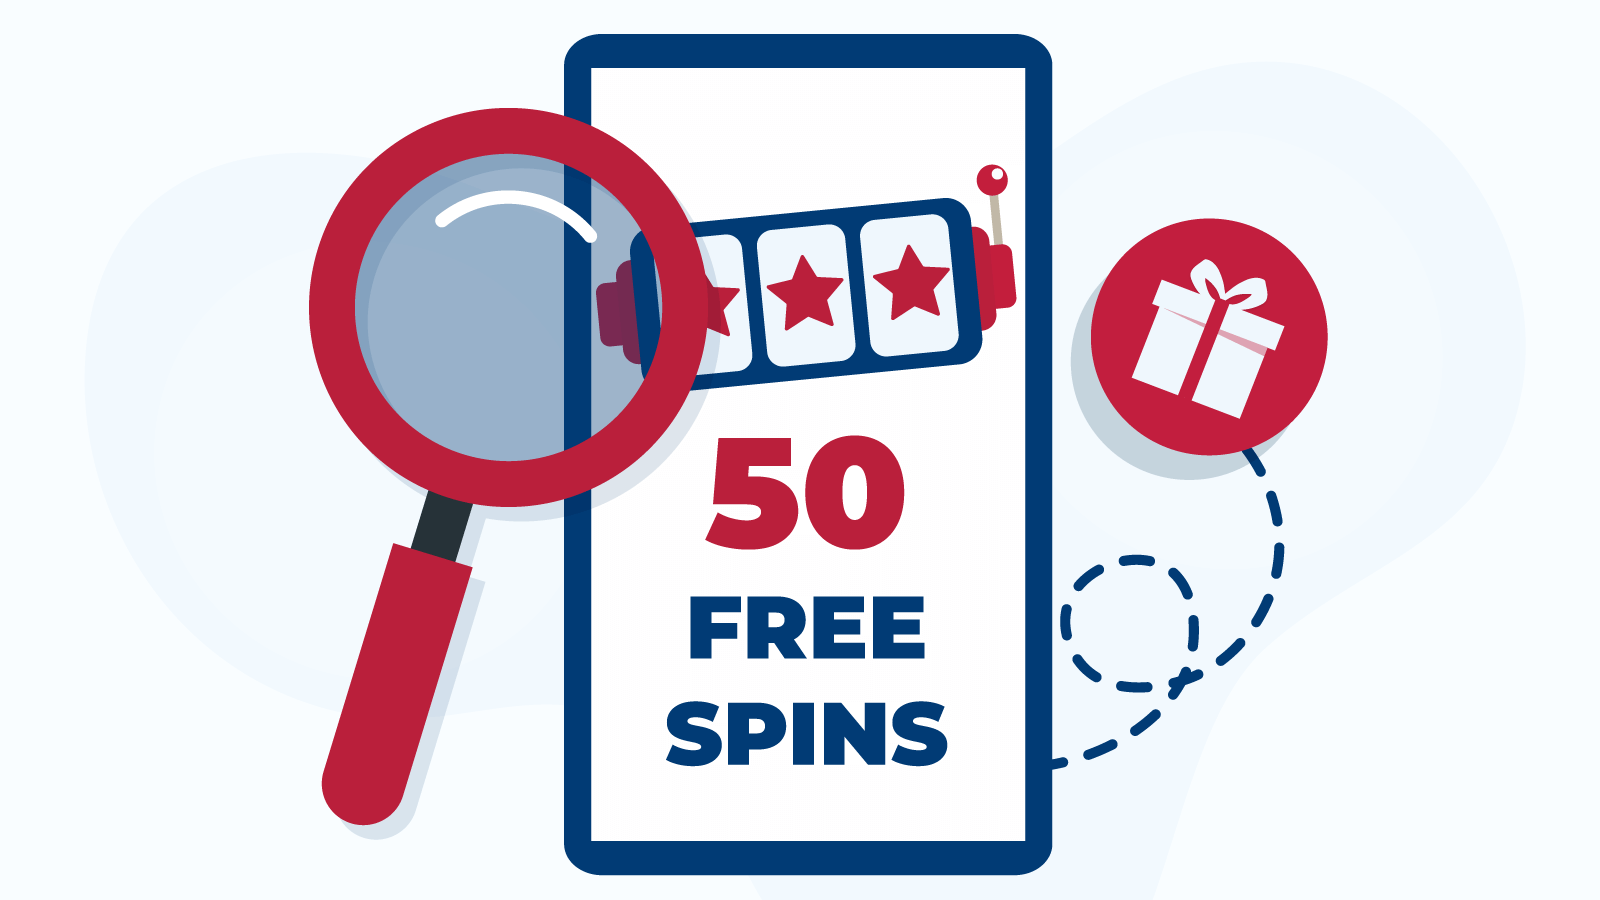 How We Research the 50 Free Spins Offers